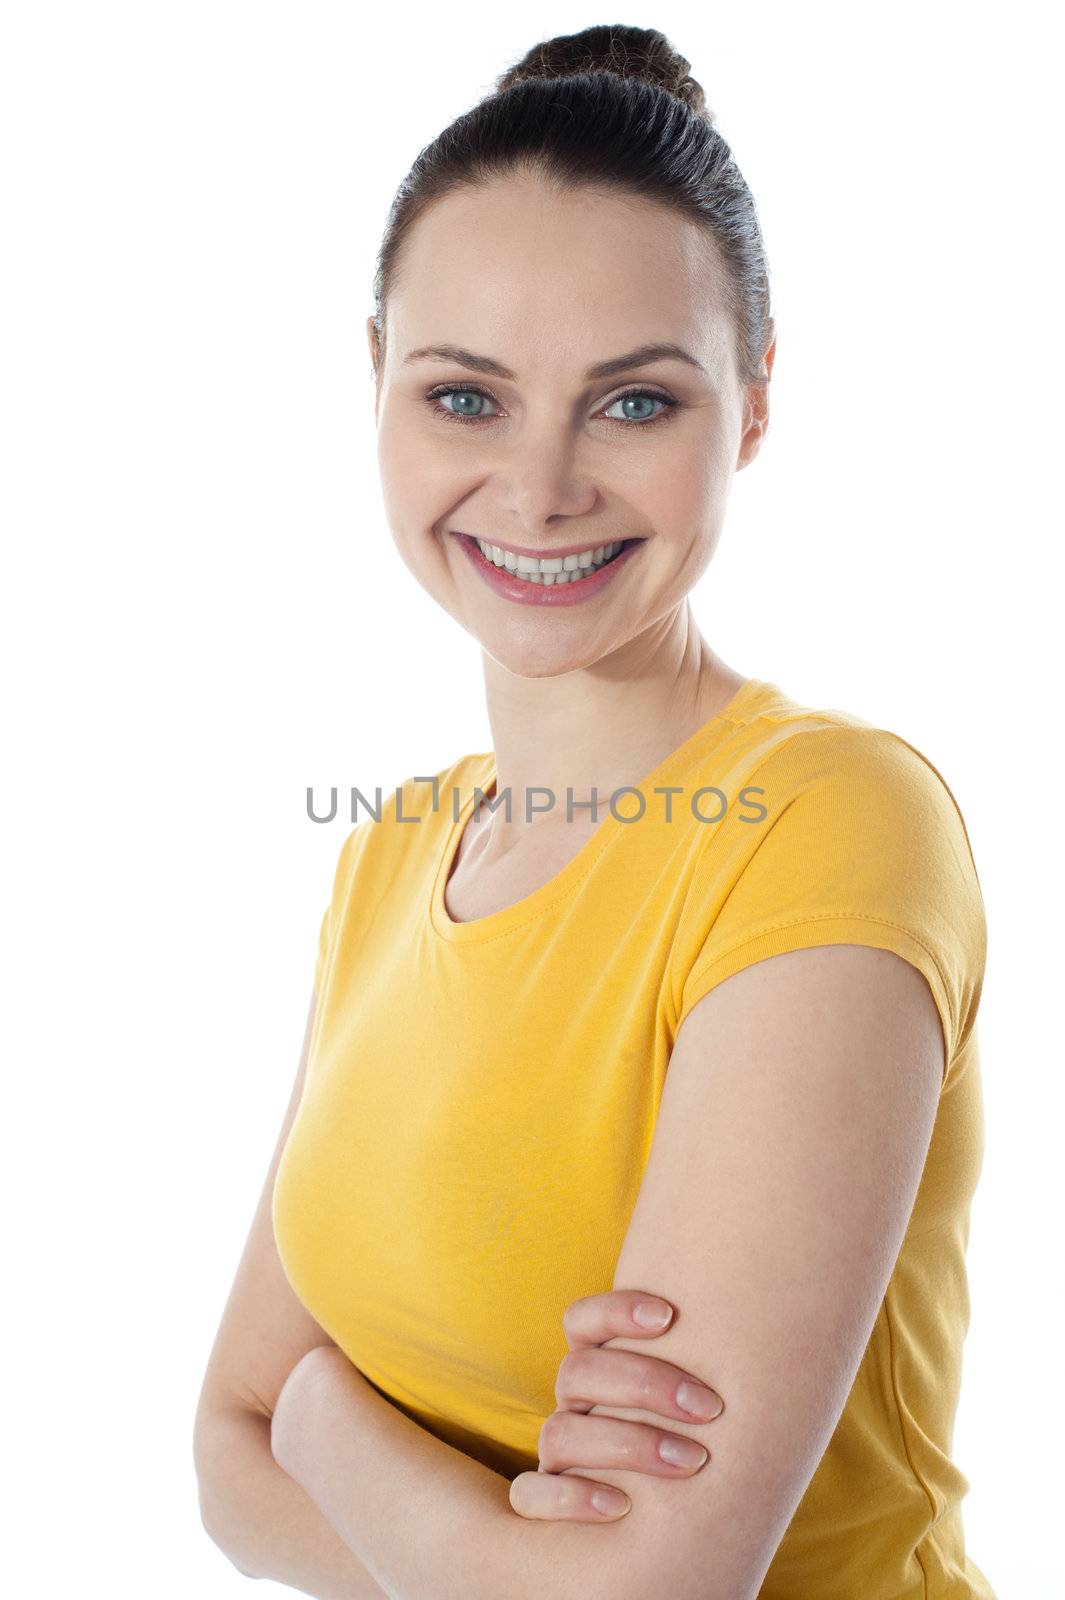 Skinny amarican teenager posing with folded arms isolated on white